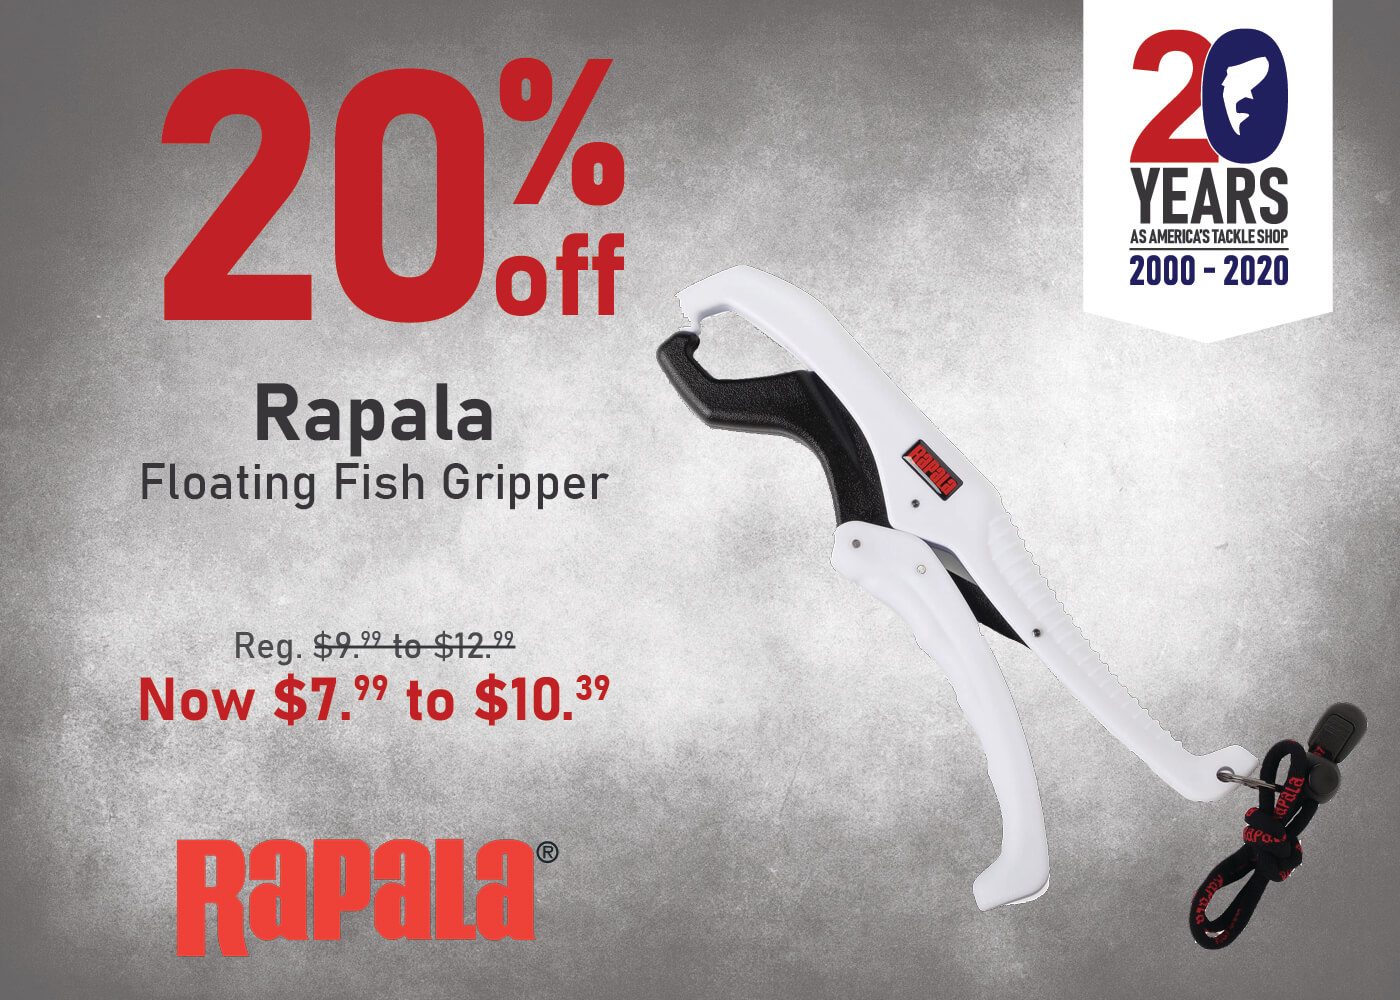 Save 20% on the Rapala Floating Fish Gripper